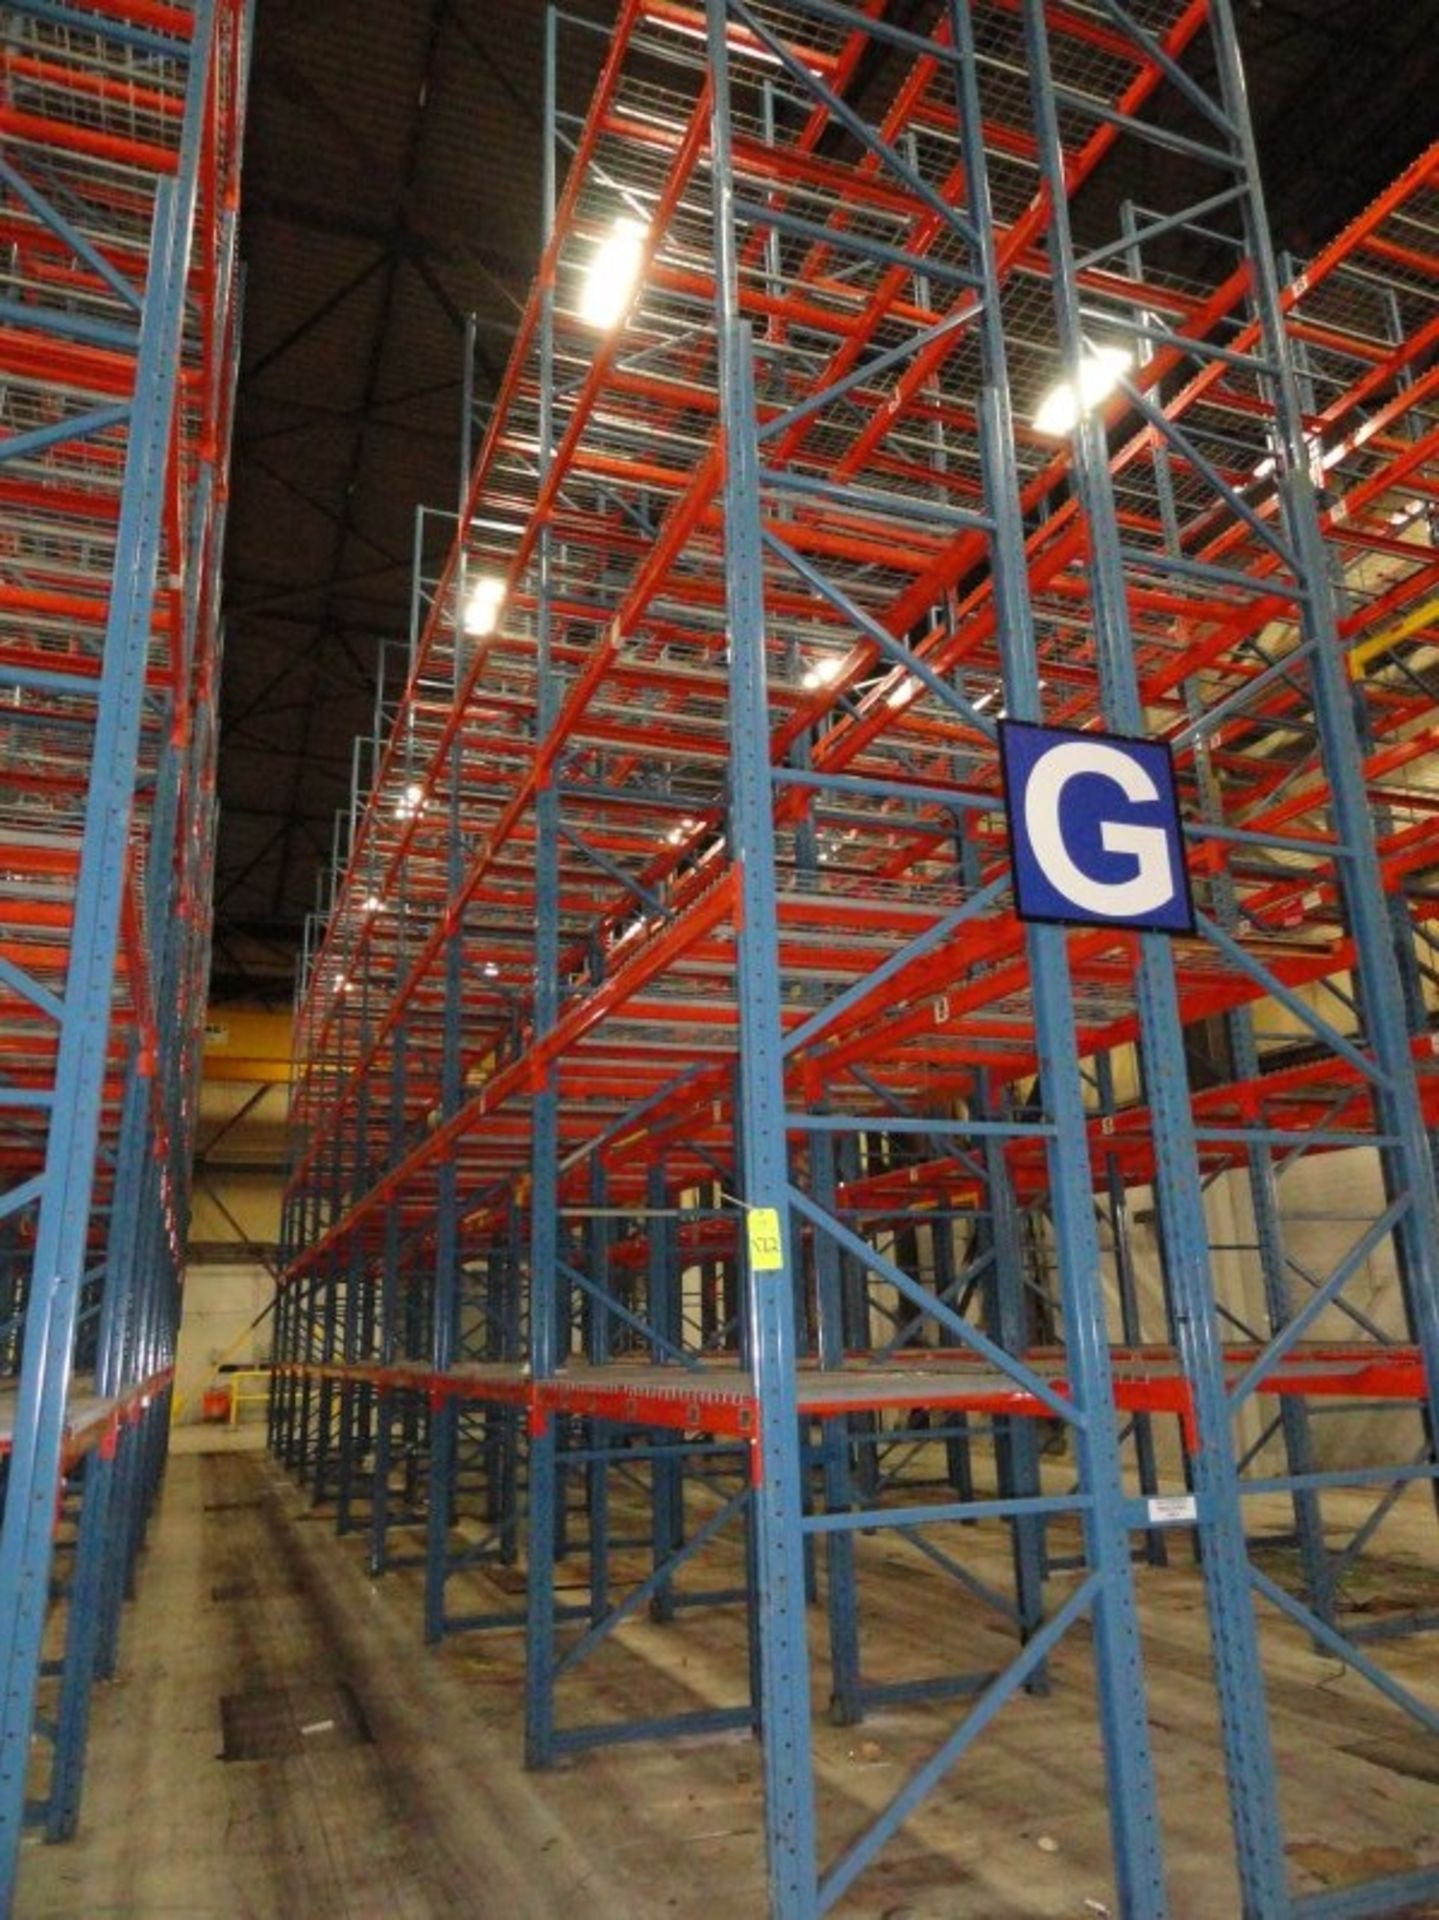 18 sections of pallet racking, 20- 30'x44" uprights, 180- 100" load beams w/wire decking